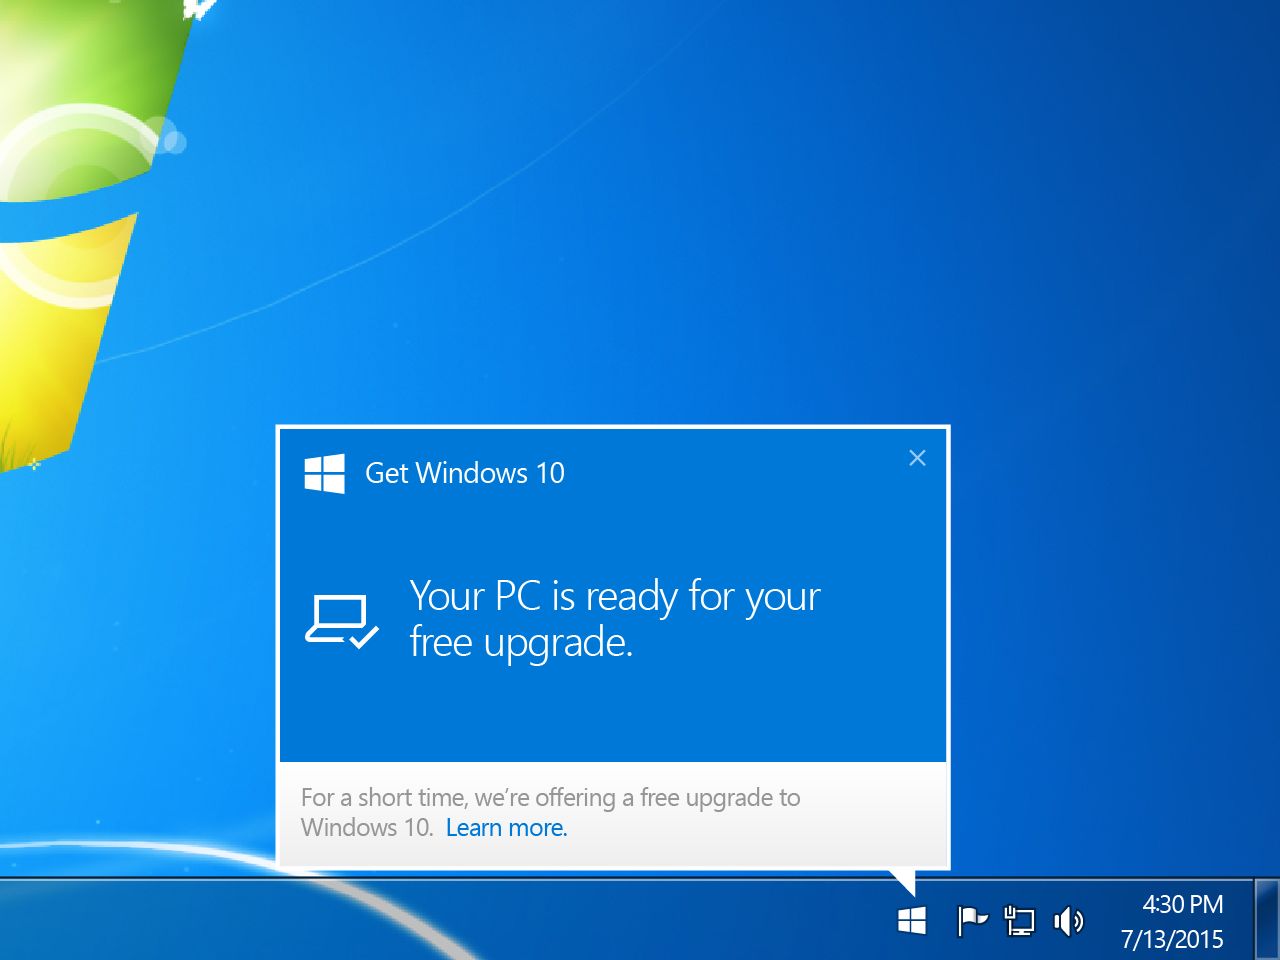 can you download windows 7 on a windows 10 computer